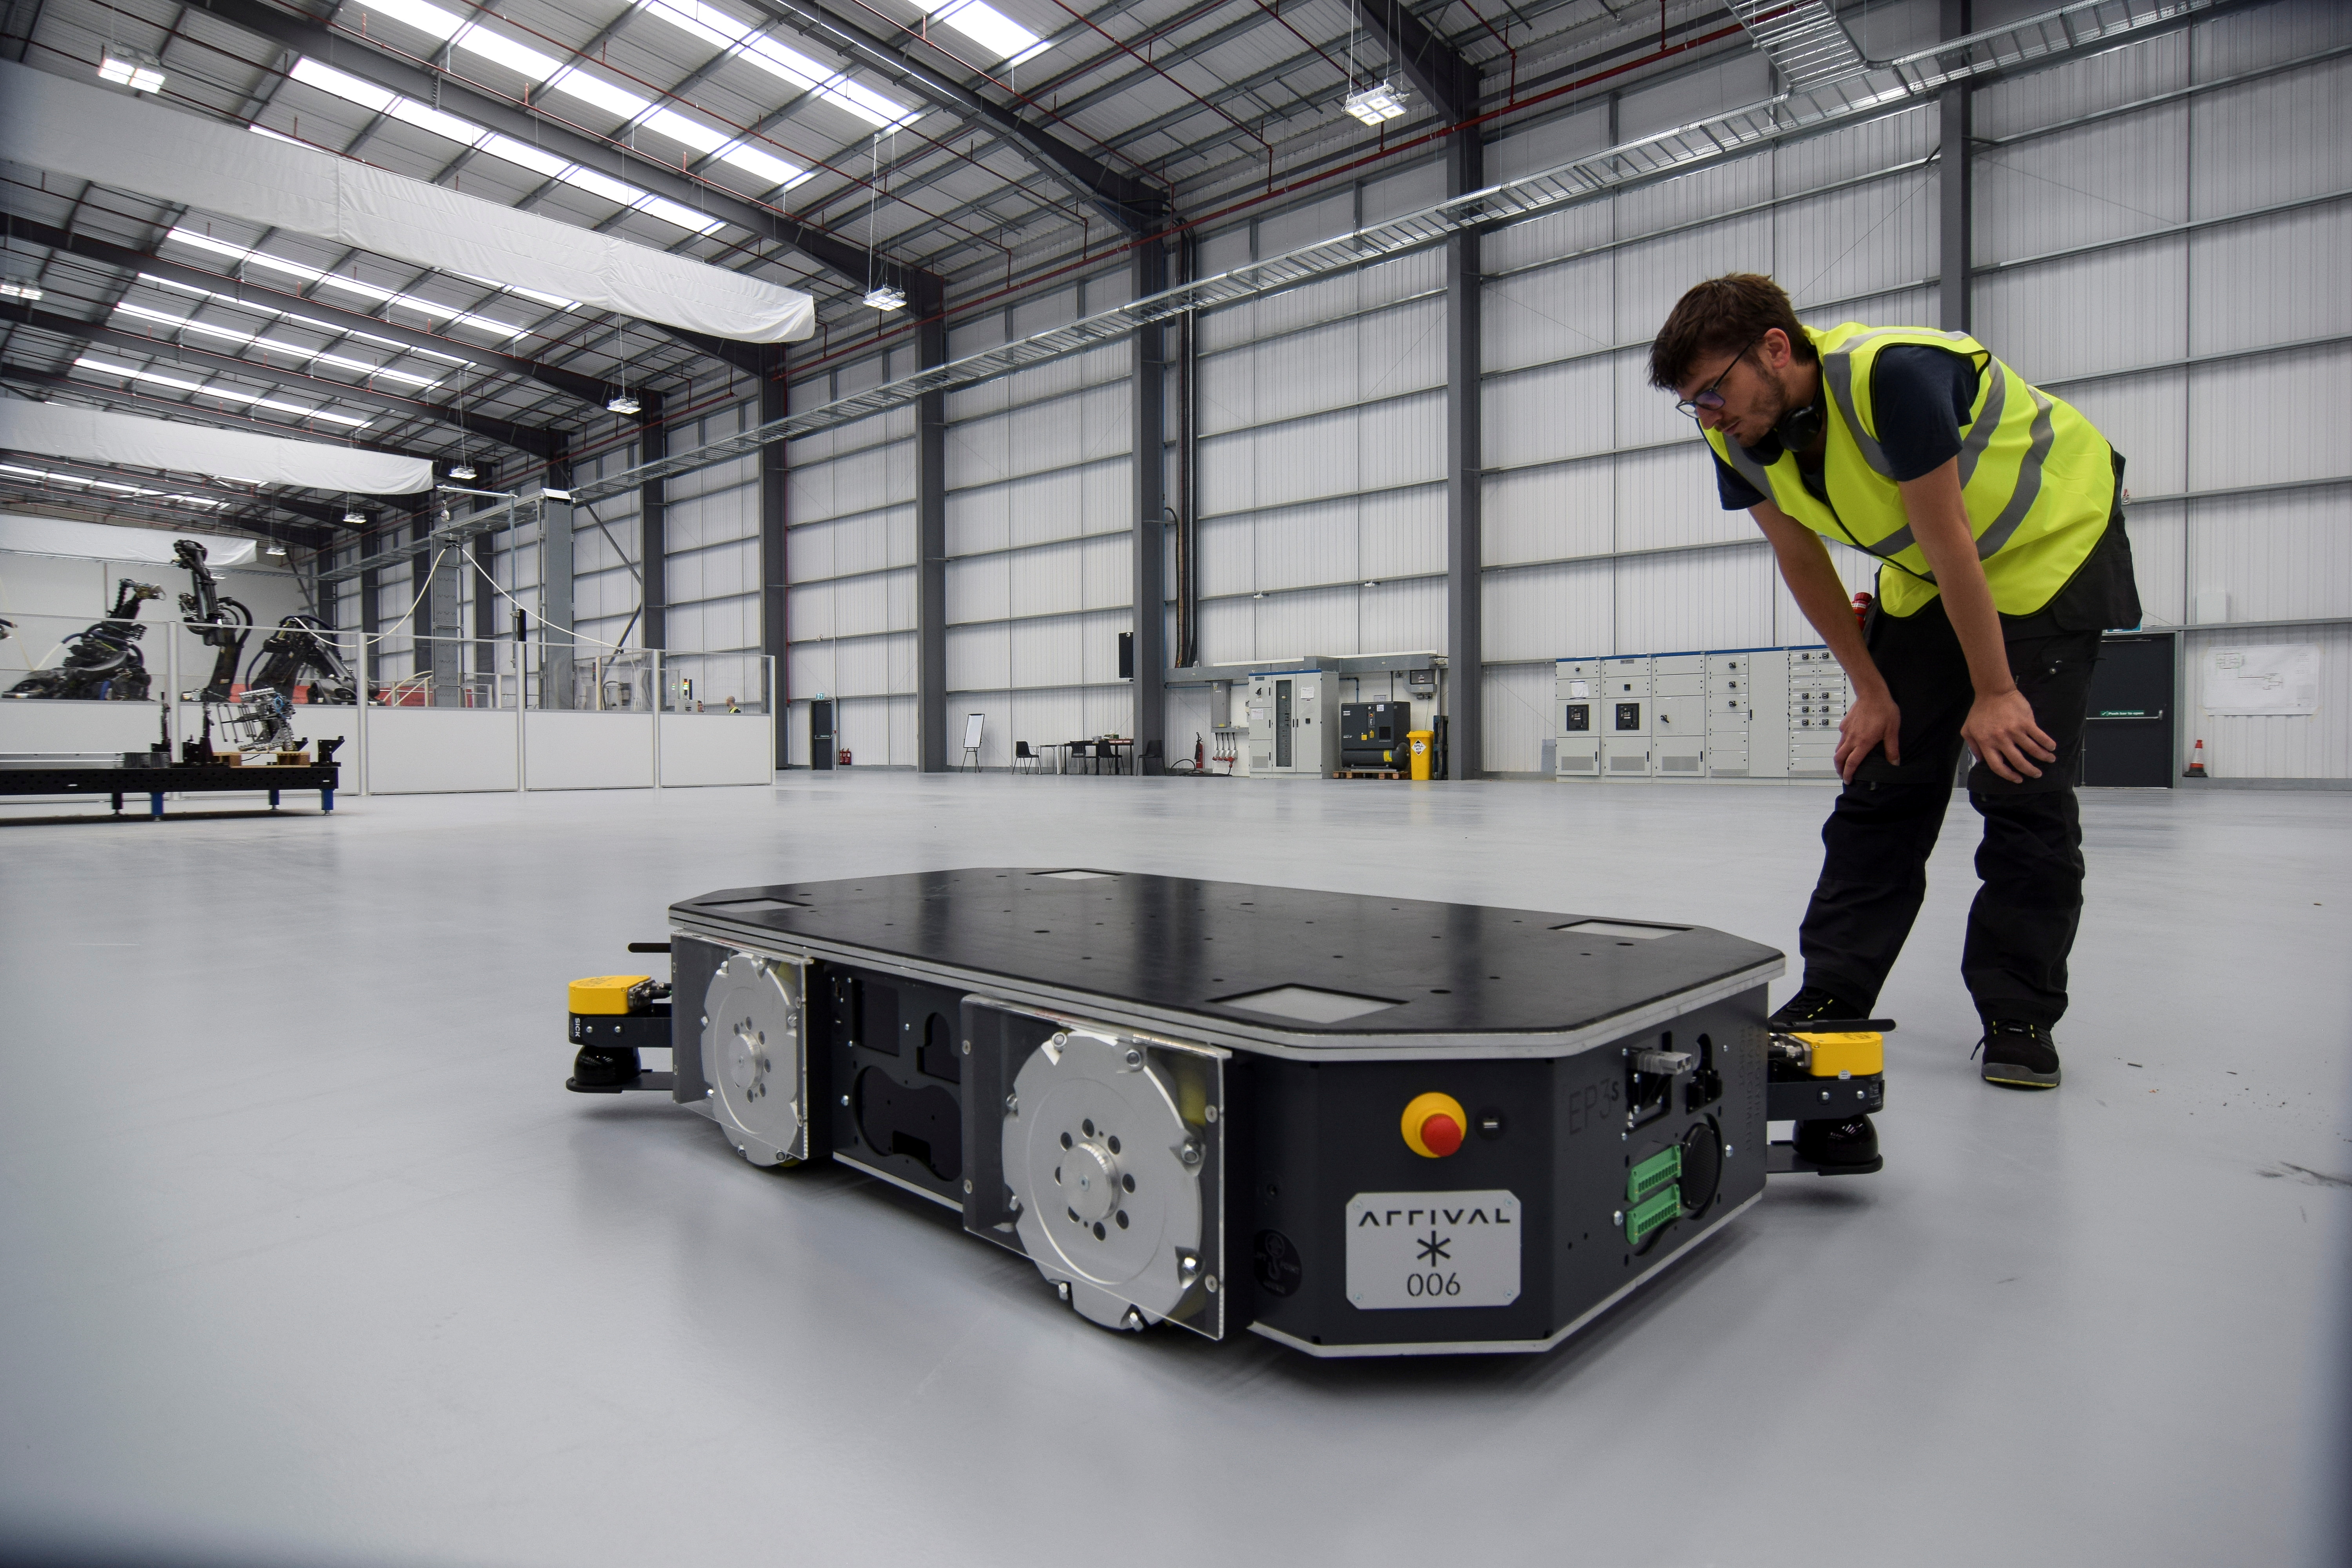 An engineer at UK electric van and bus maker Arrival inspects a specially developed autonomous robot at the startup's low-cost "microfactory" in Bicester, Britain, August 3, 2021. REUTERS/Nick Carey